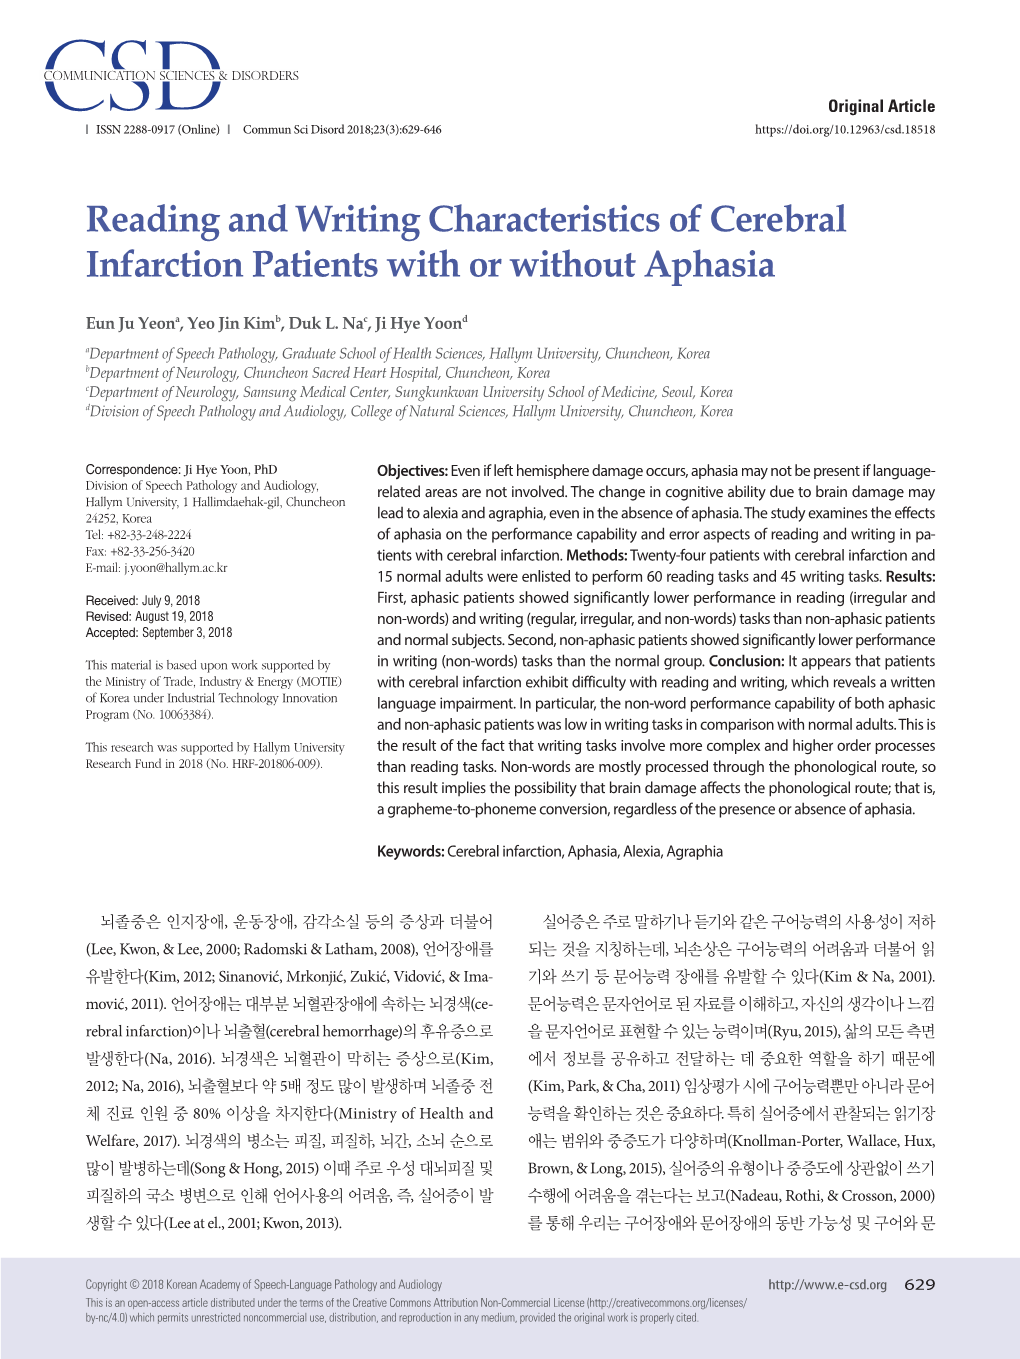 Reading and Writing Characteristics of Cerebral Infarction Patients with Or Without Aphasia